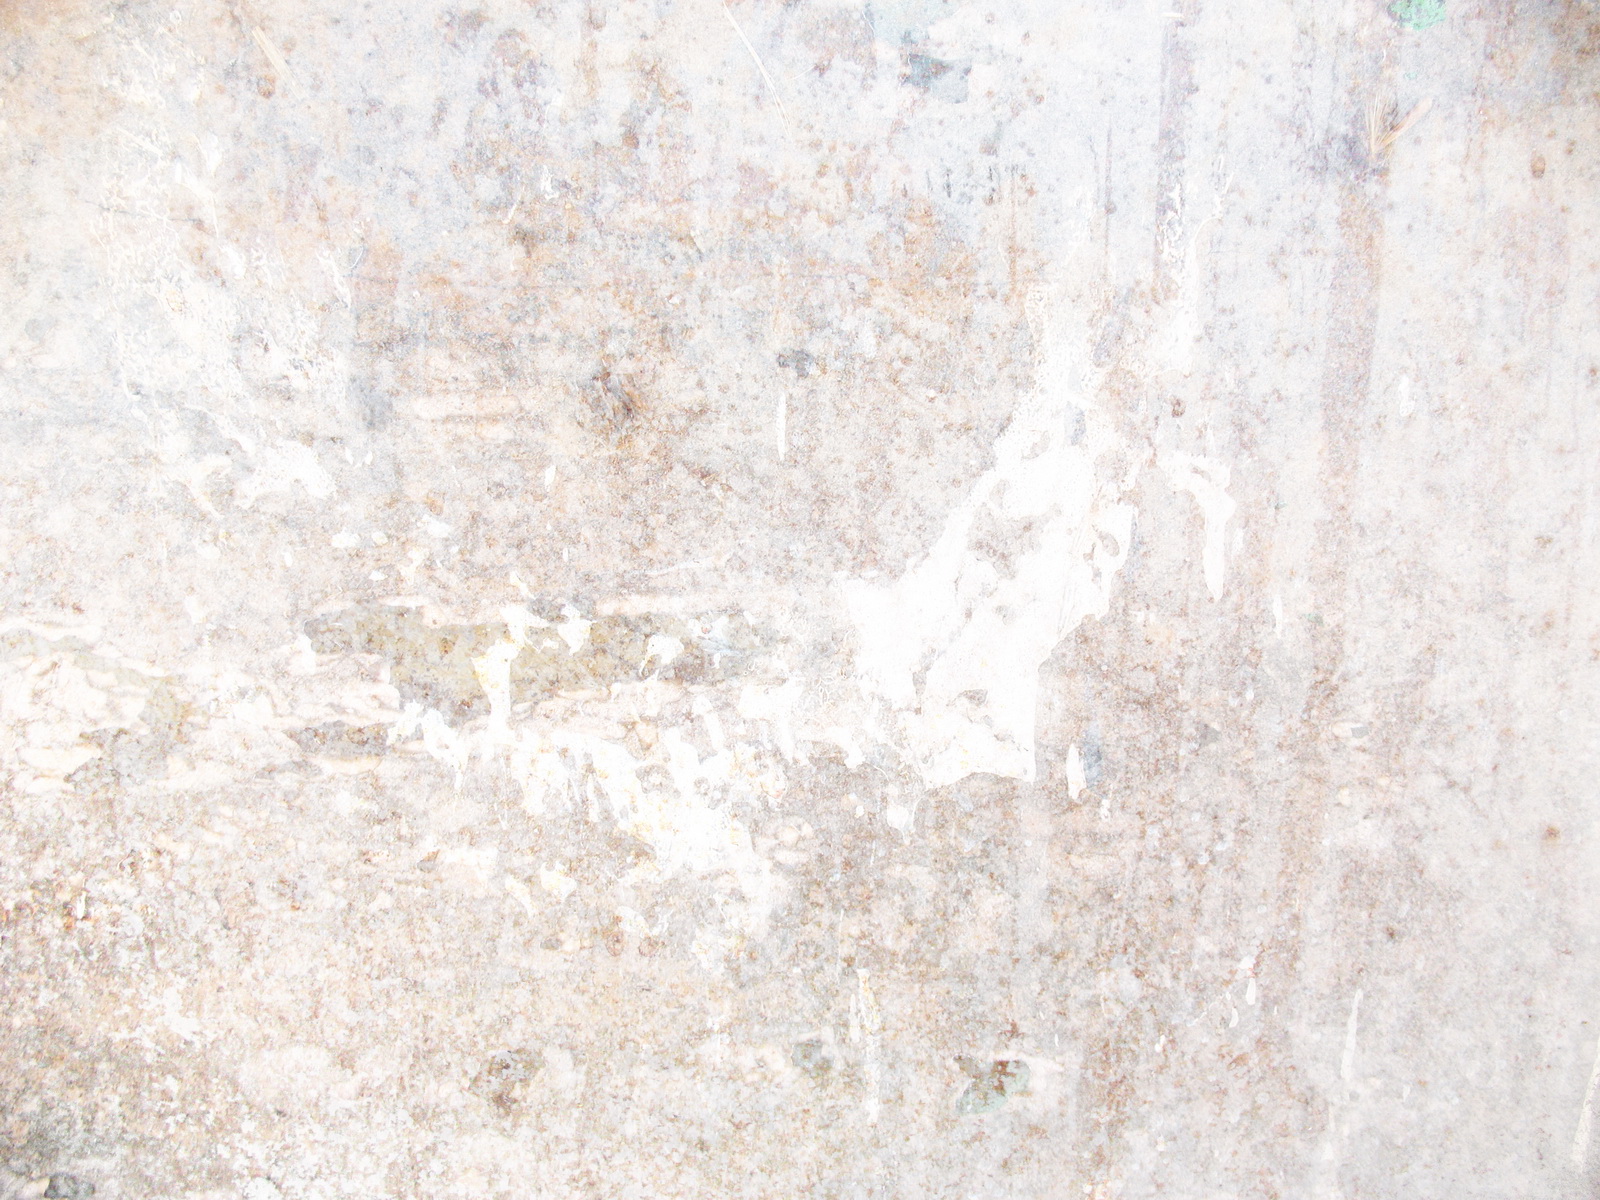  texture download photo background white stucco background texture 1600x1200